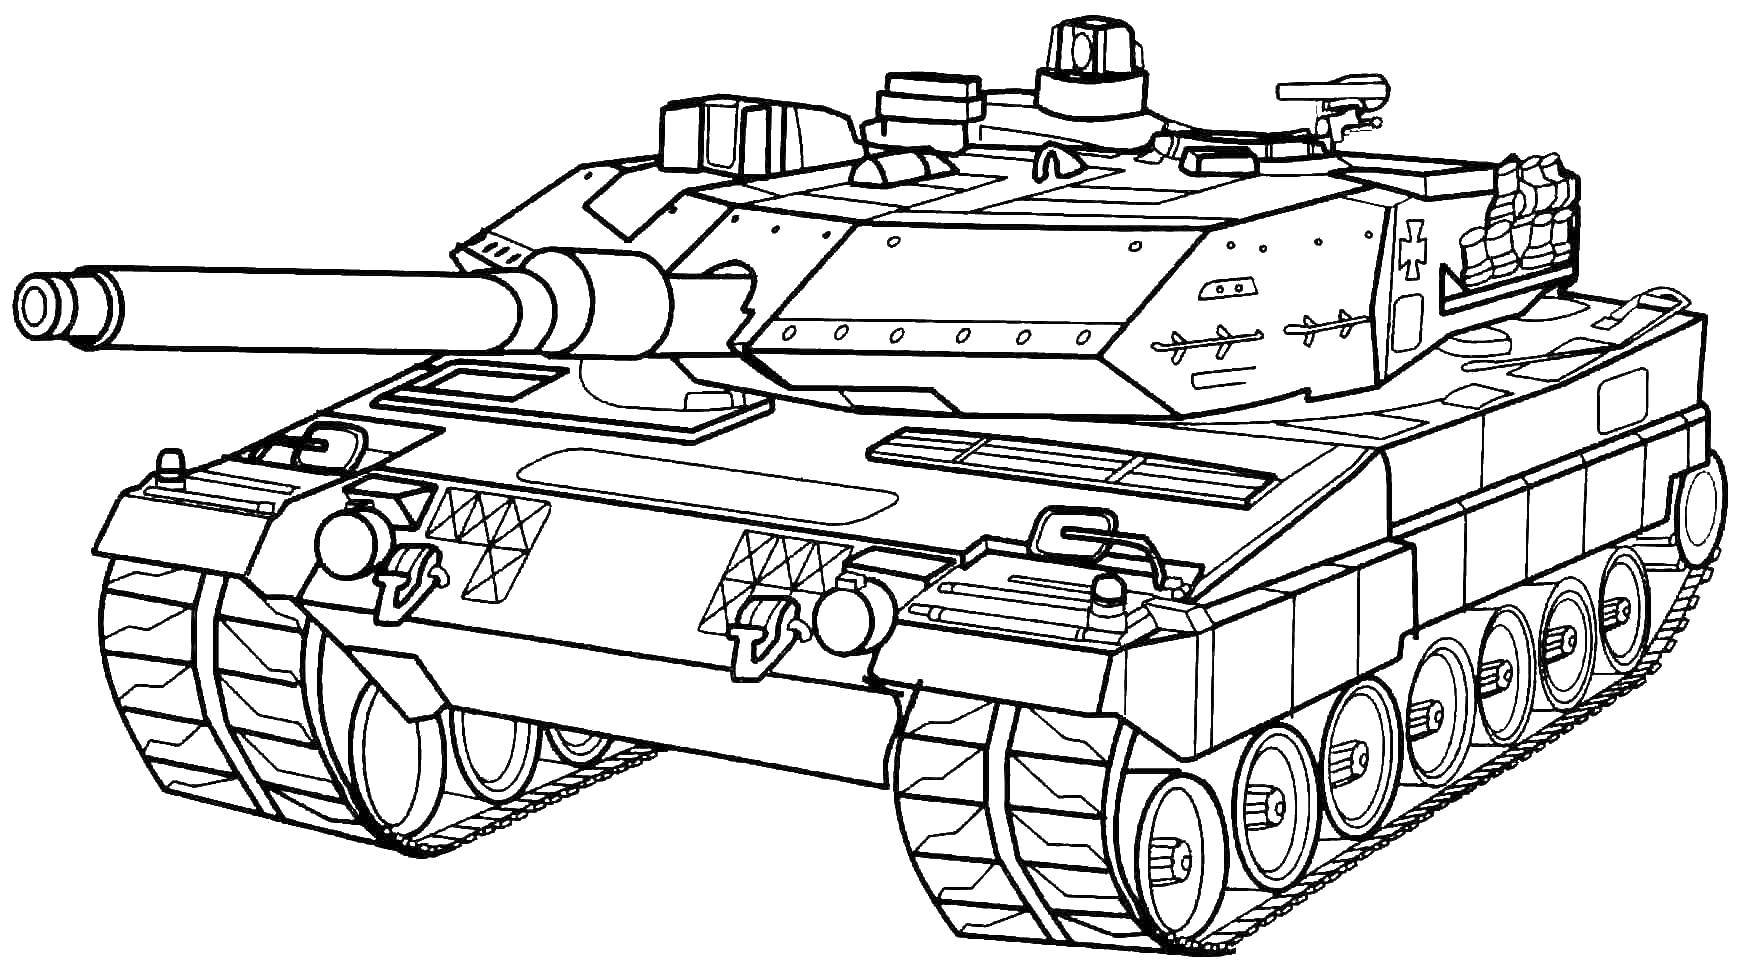 Coloring Tank. Category Equipment. Tags:  military equipment, tank, special.